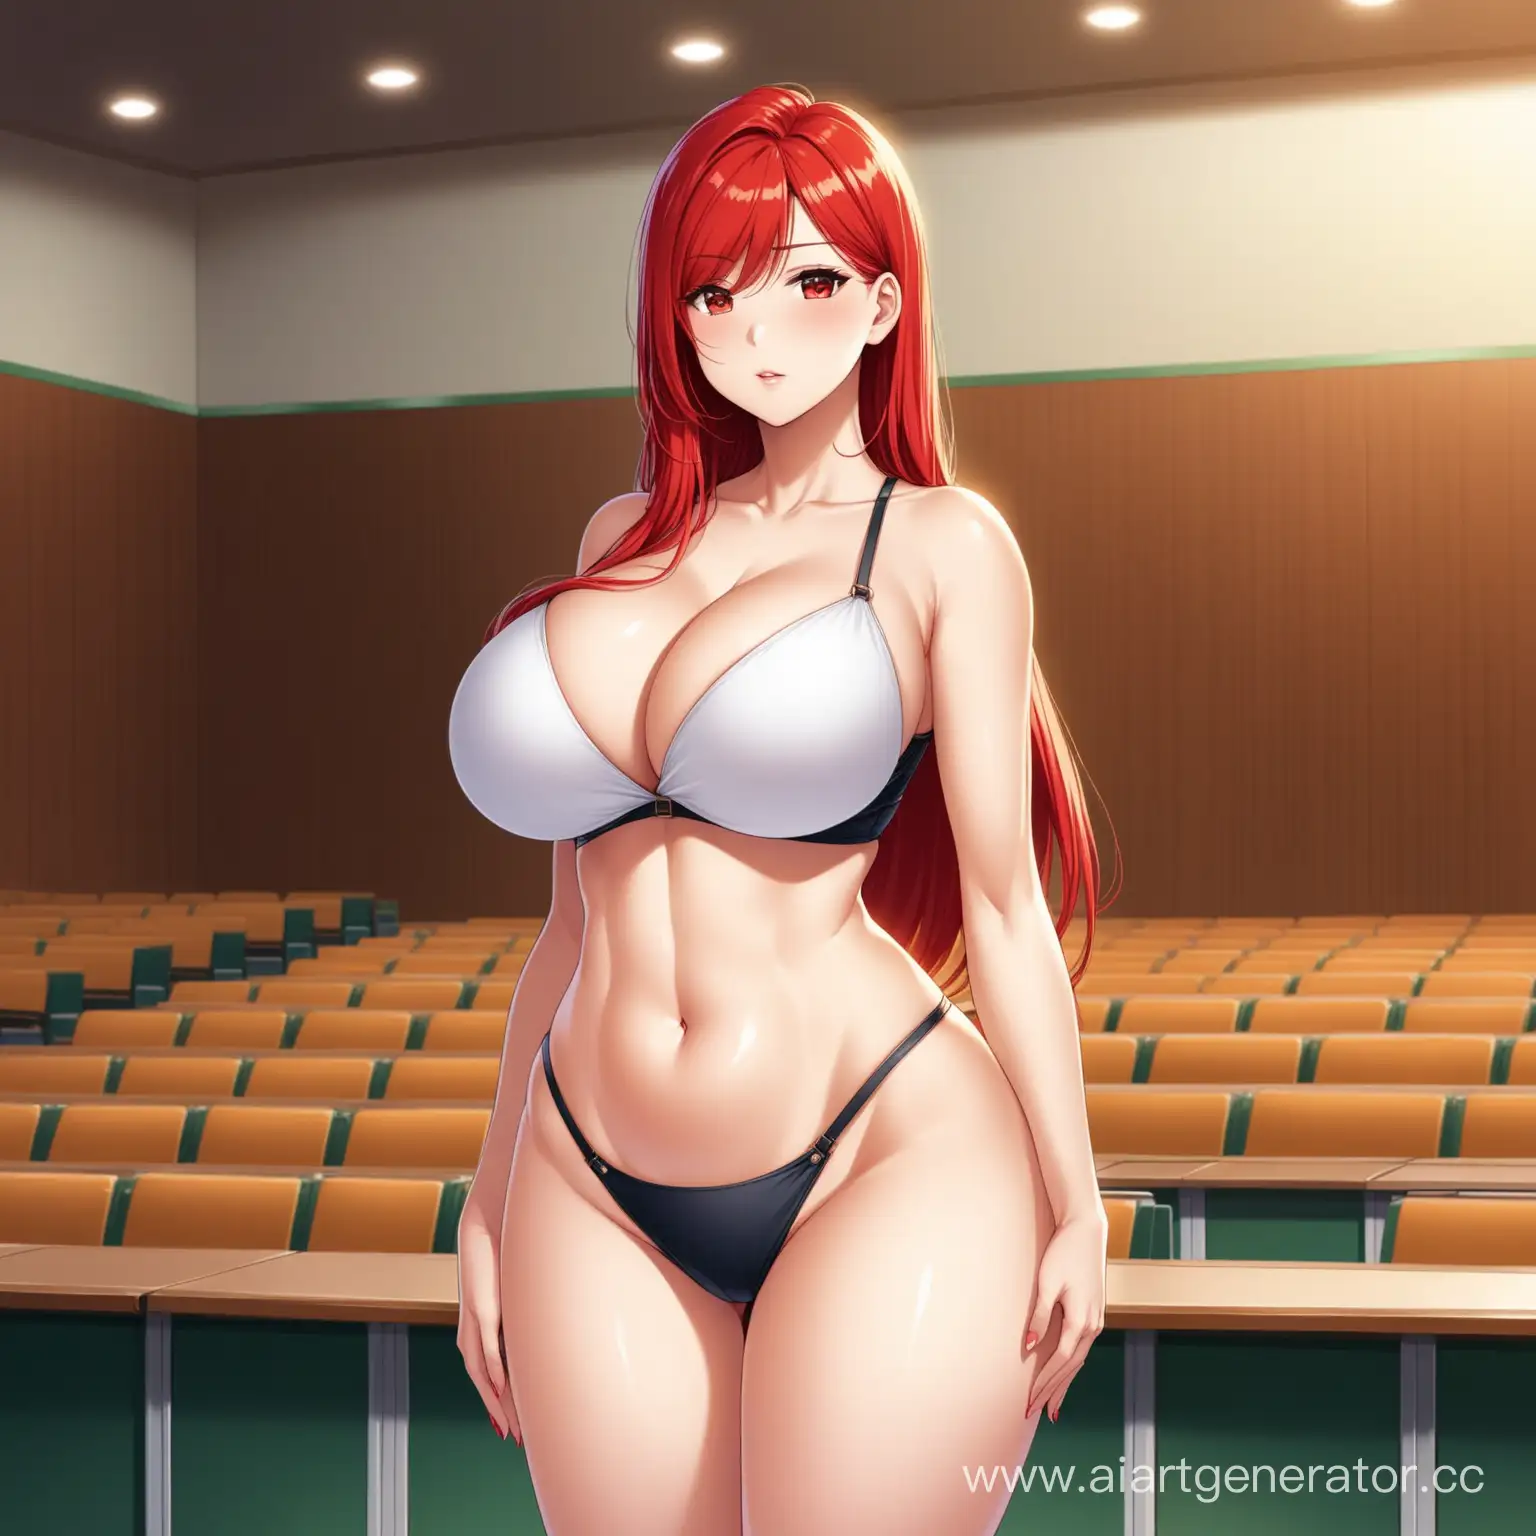 Curvaceous-MILF-Professor-Holding-Book-in-Lecture-Hall